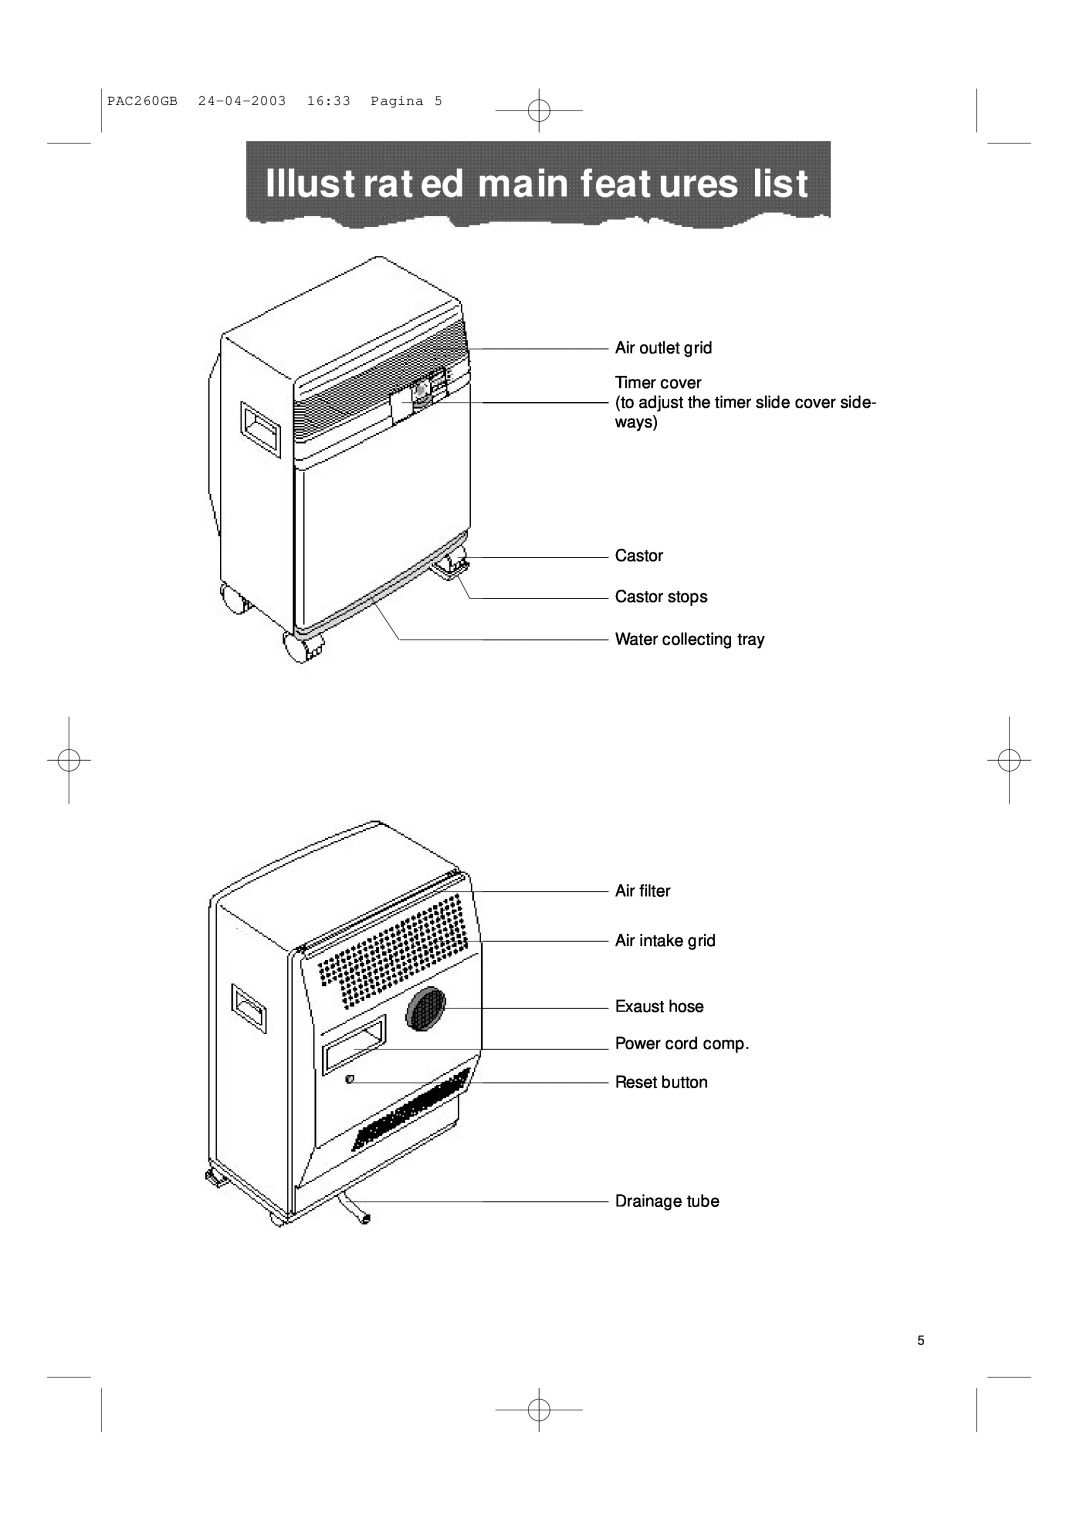 DeLonghi PAC260 Illustrated main features list, Air outlet grid Timer cover, Castor stops Water collecting tray Air filter 